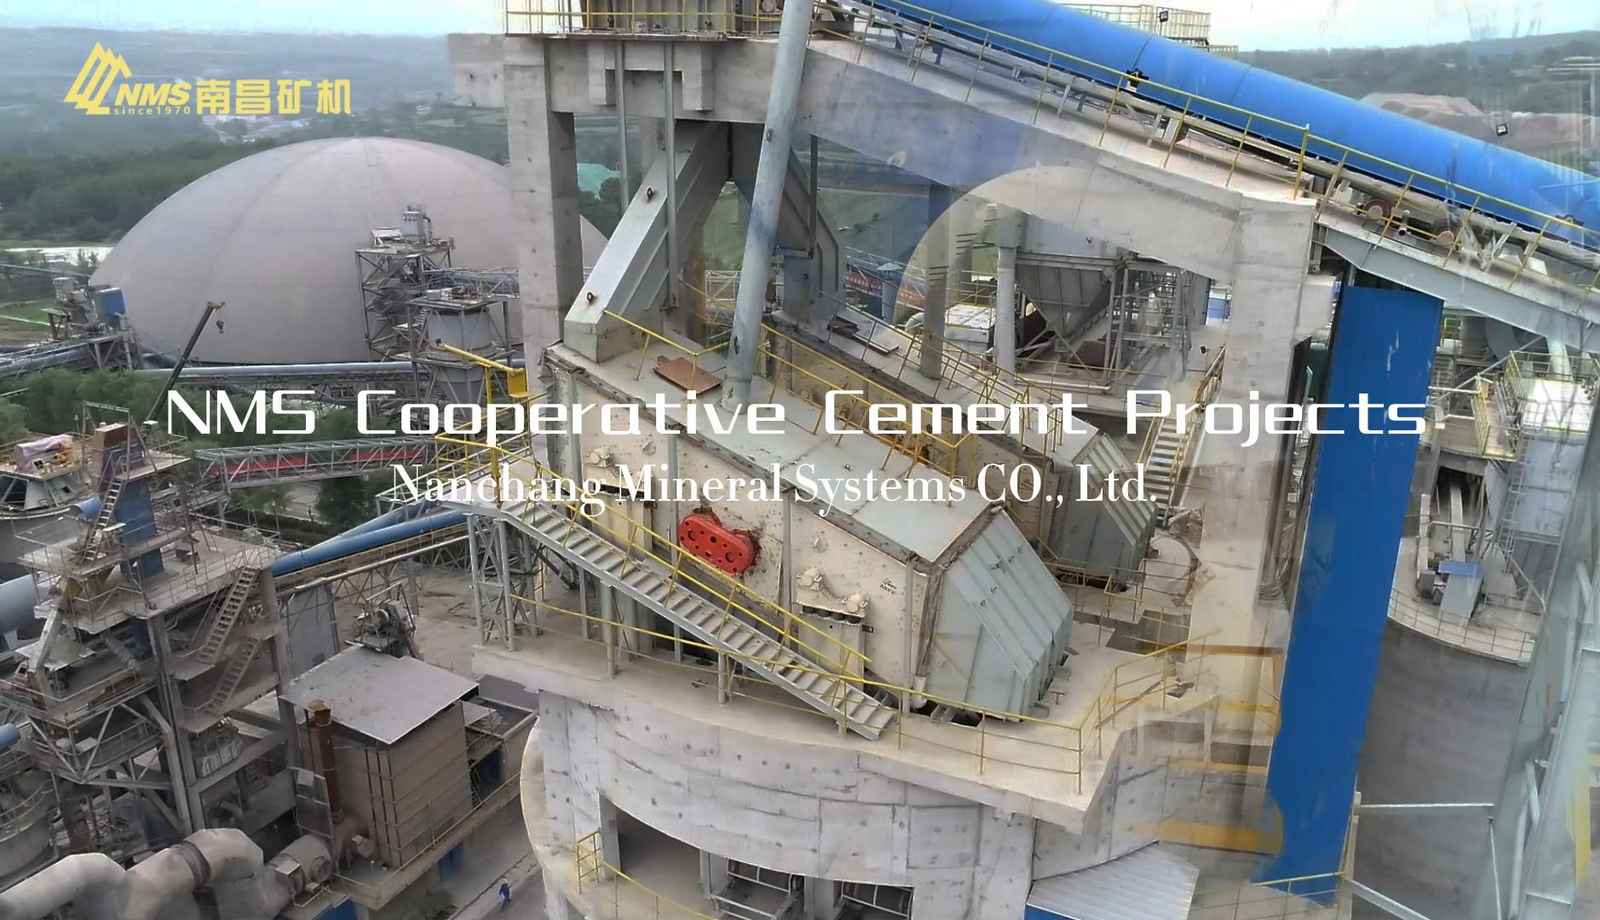 NMS Cooperative Cement Projects